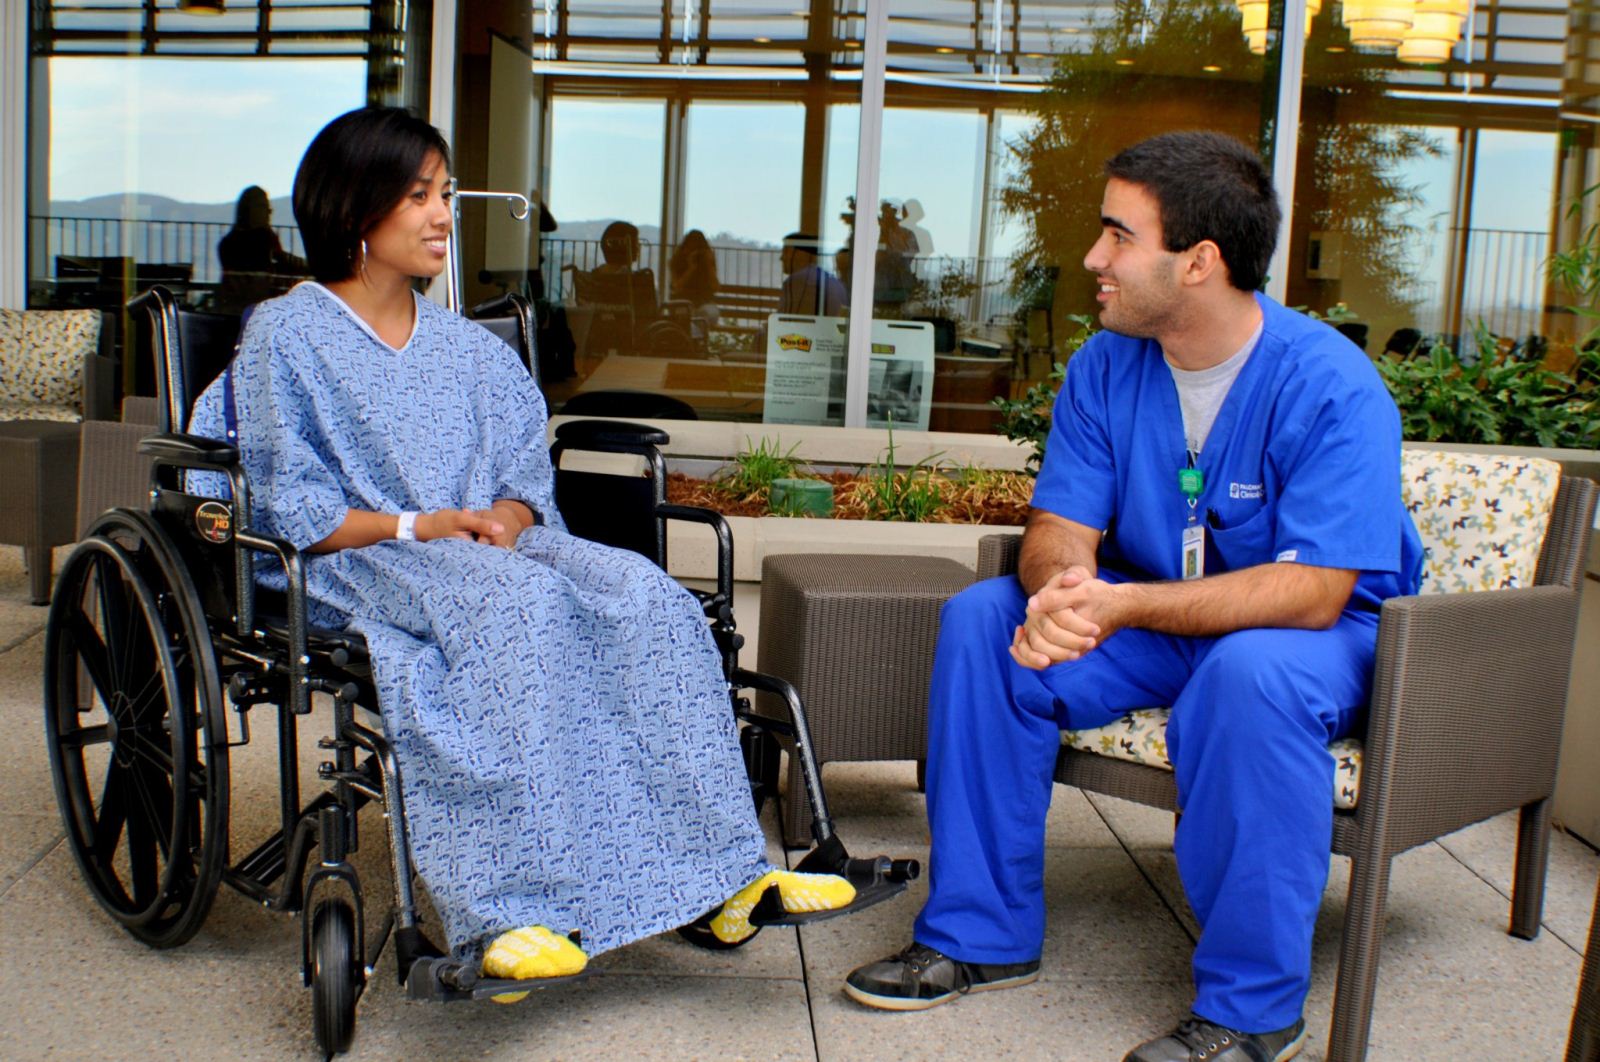 male nurse helping female patient in a wheel chair having a conversation